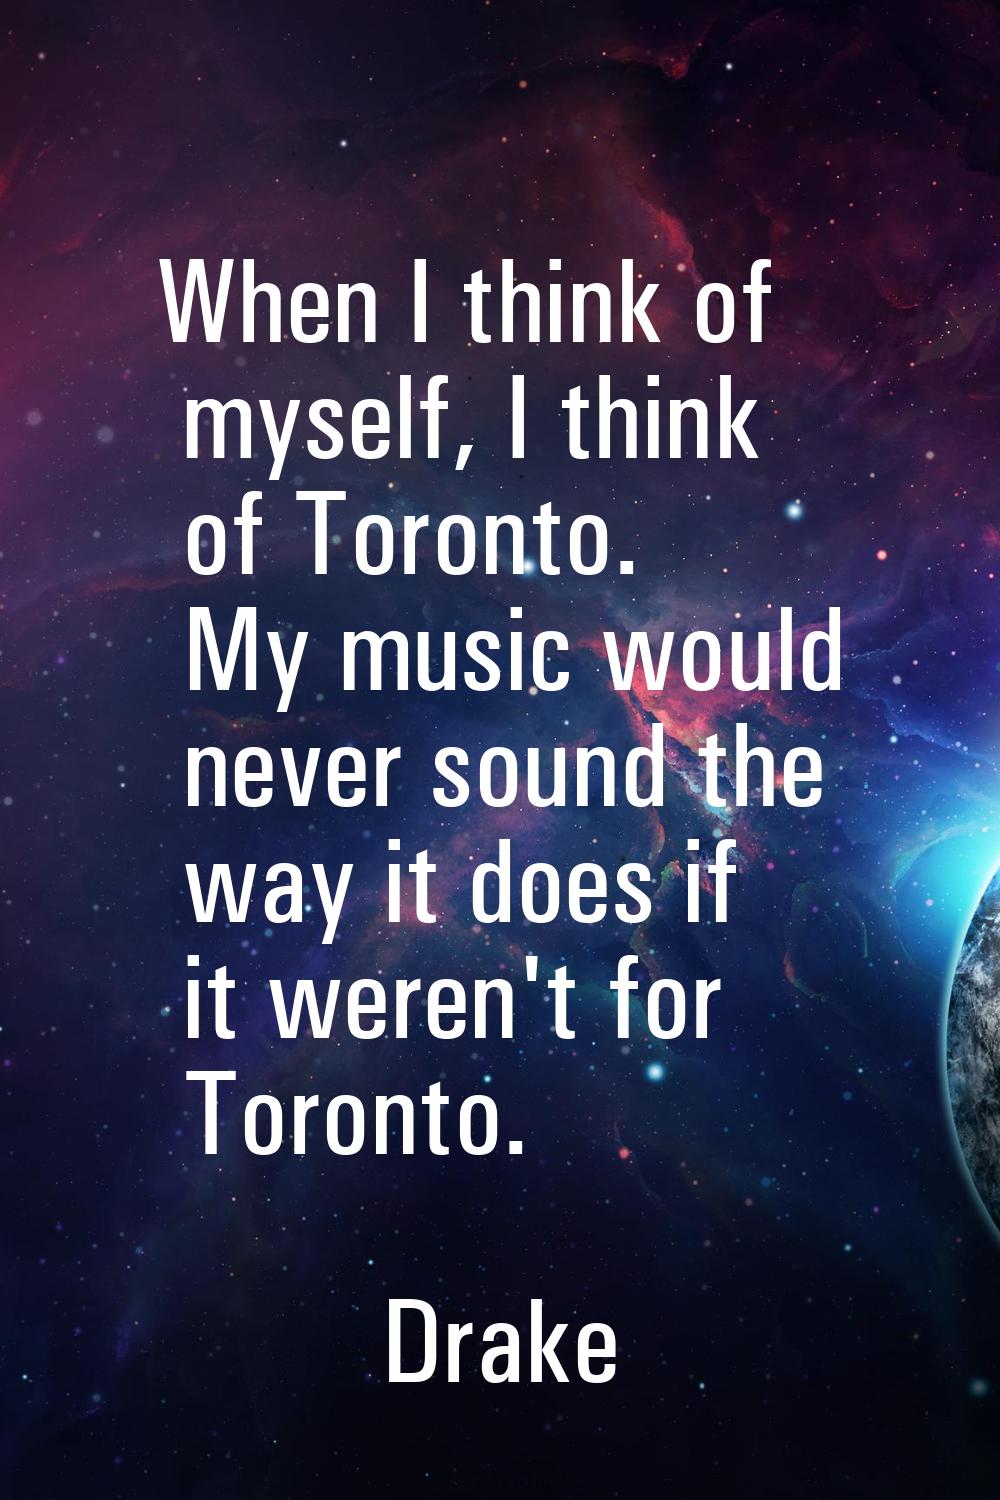 When I think of myself, I think of Toronto. My music would never sound the way it does if it weren'